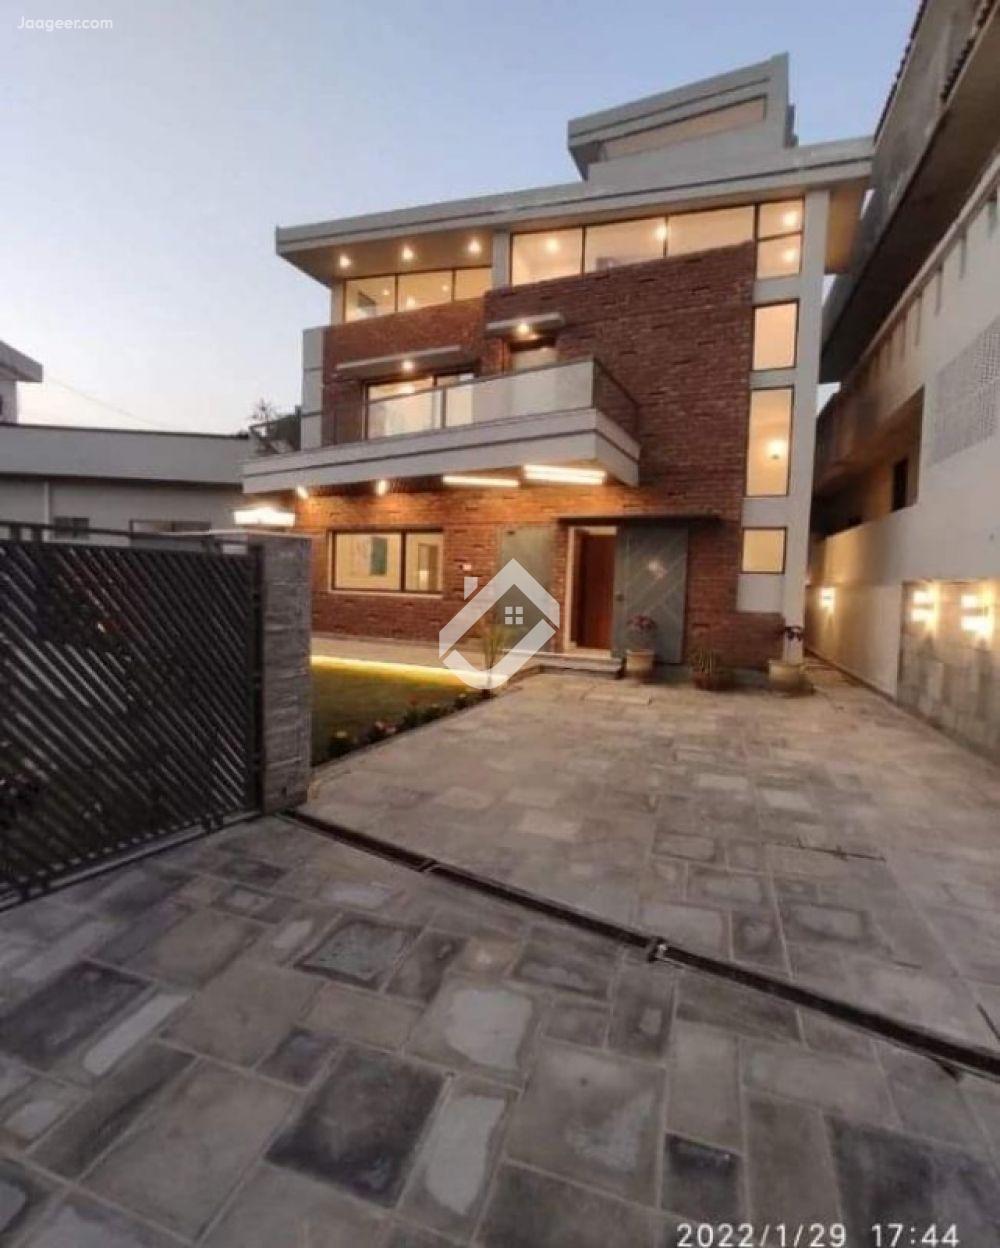 View  12 Marla Double Storey House For Sale In DHA Phase 2 in DHA Phase 2, Islamabad